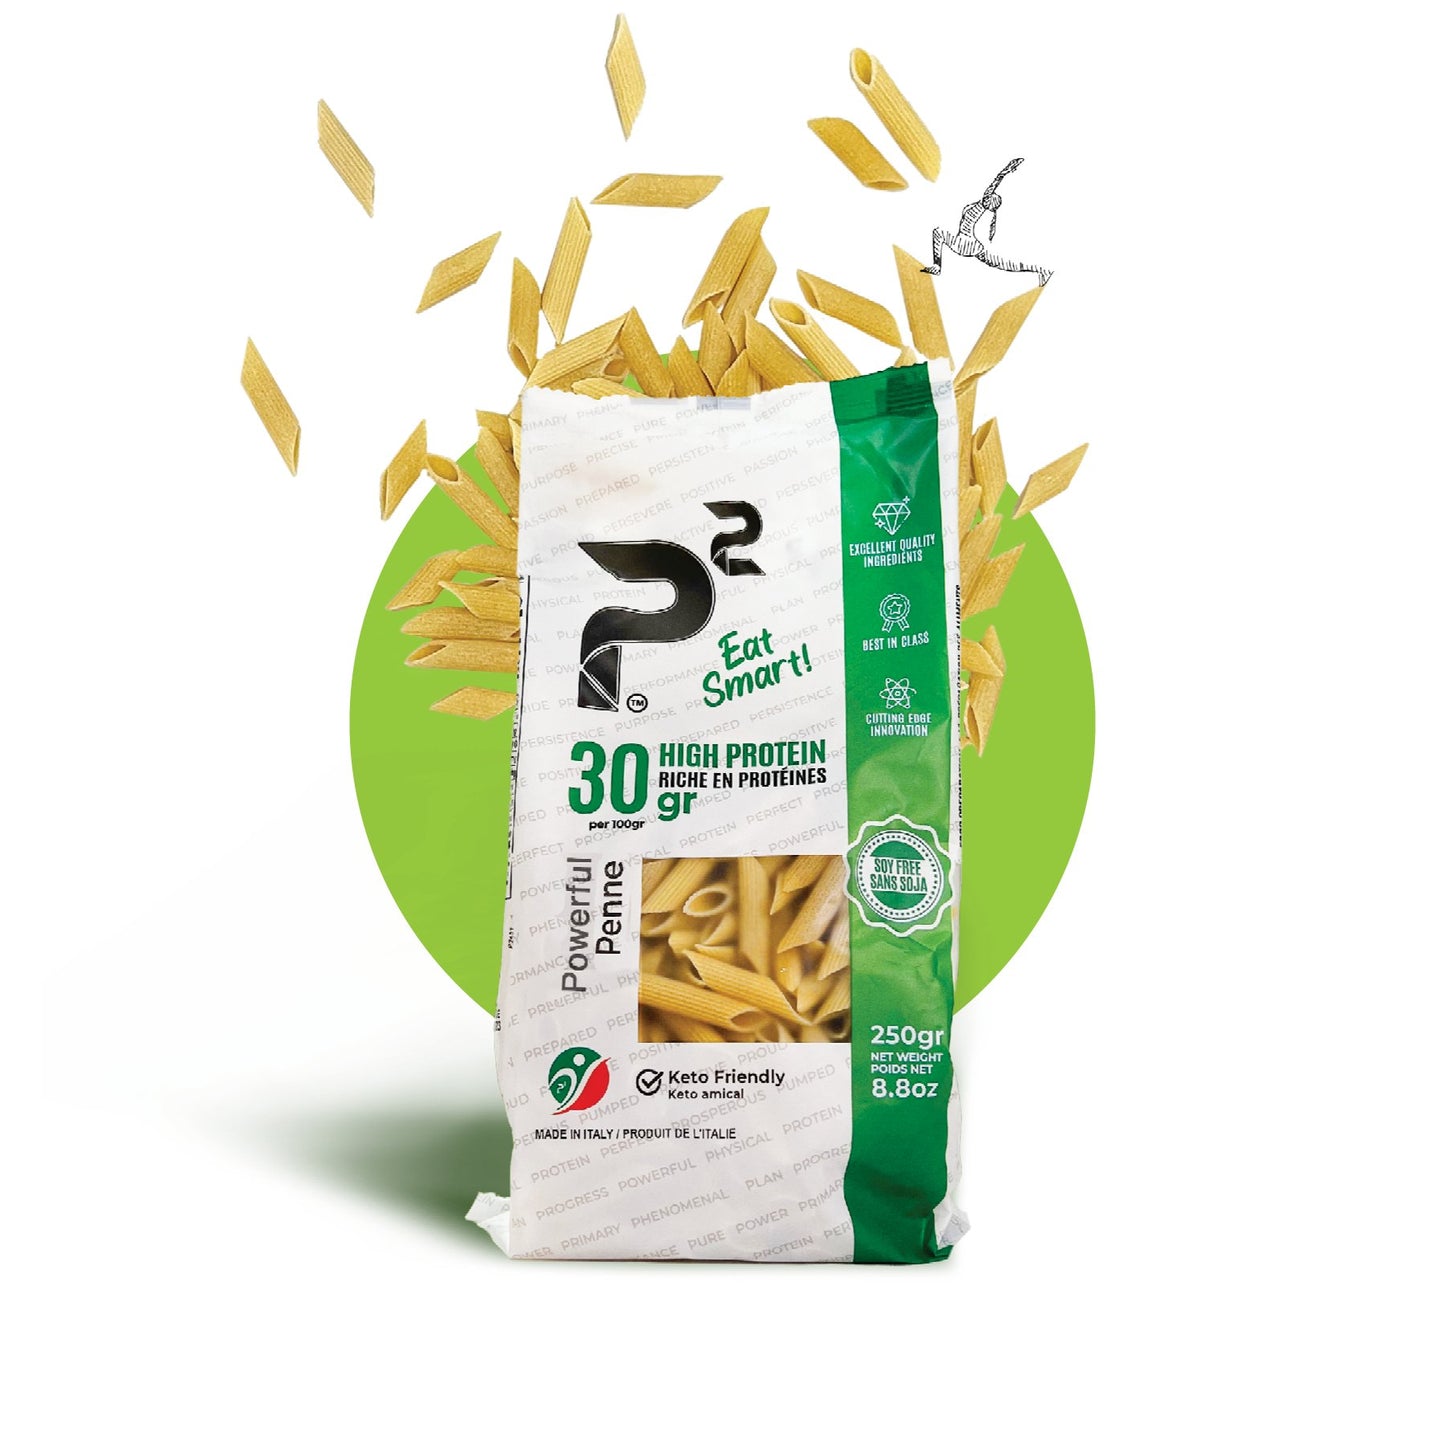 Powerful Penne 250g Low carb, high protein, fibre rich, with more balanced macros. 30g protein and 24g net carbs per 100g.